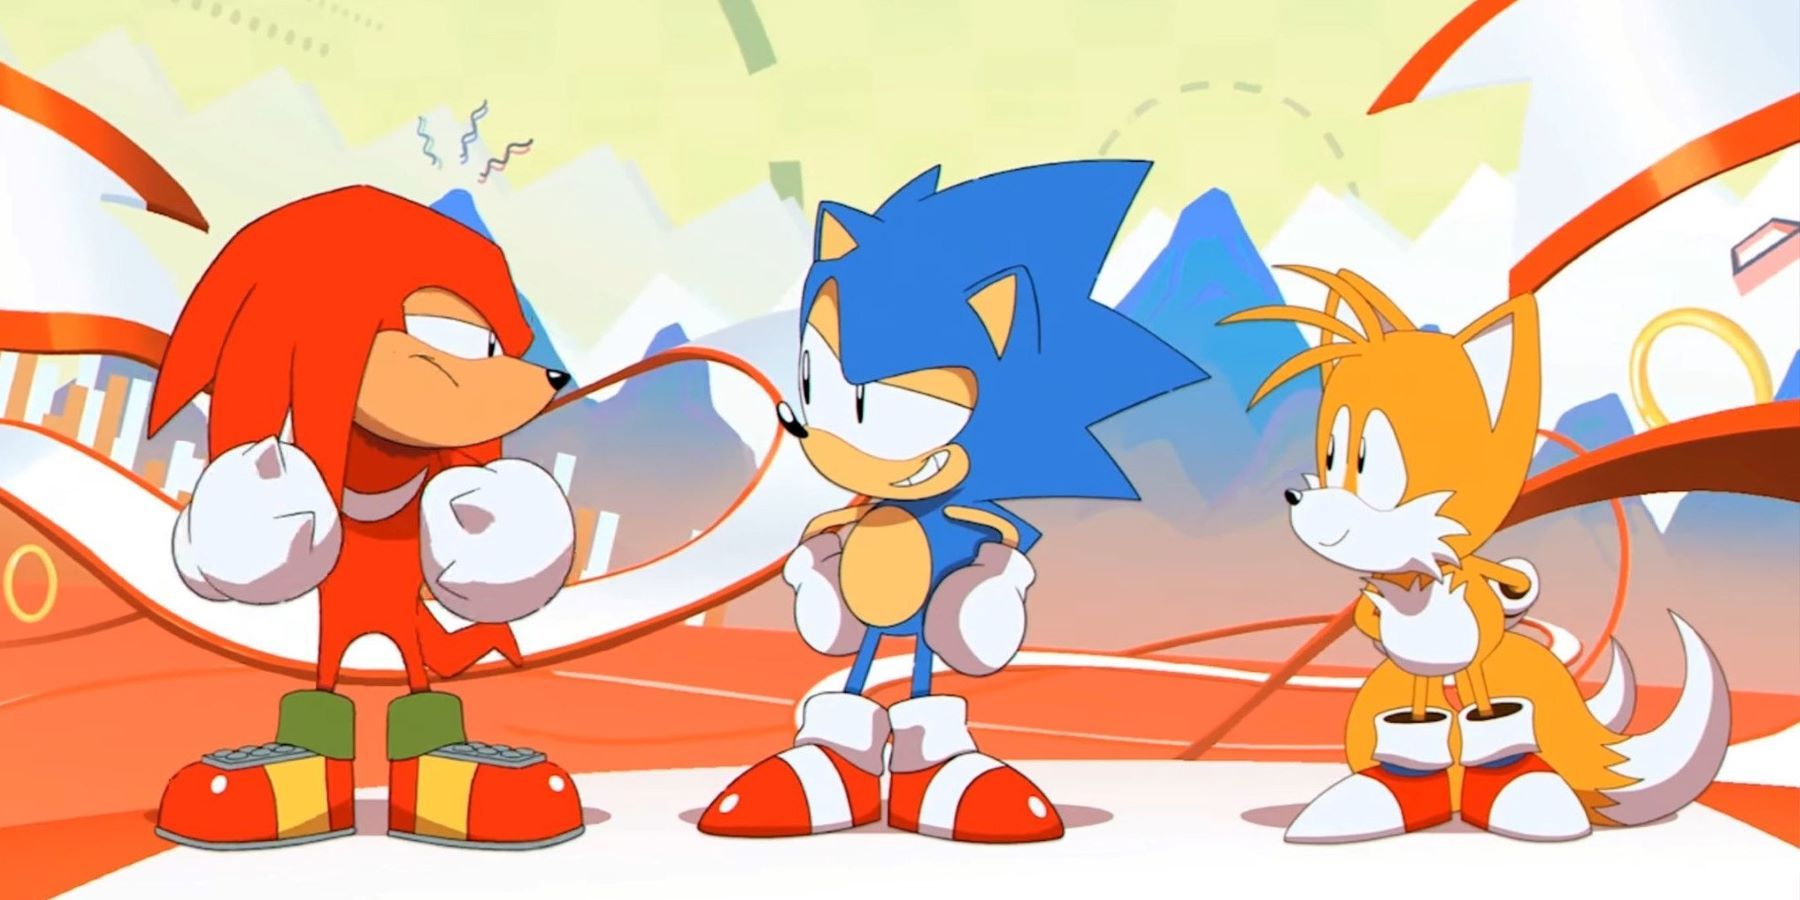 Knuckles, Sonic, and Tails in Sonic Mania